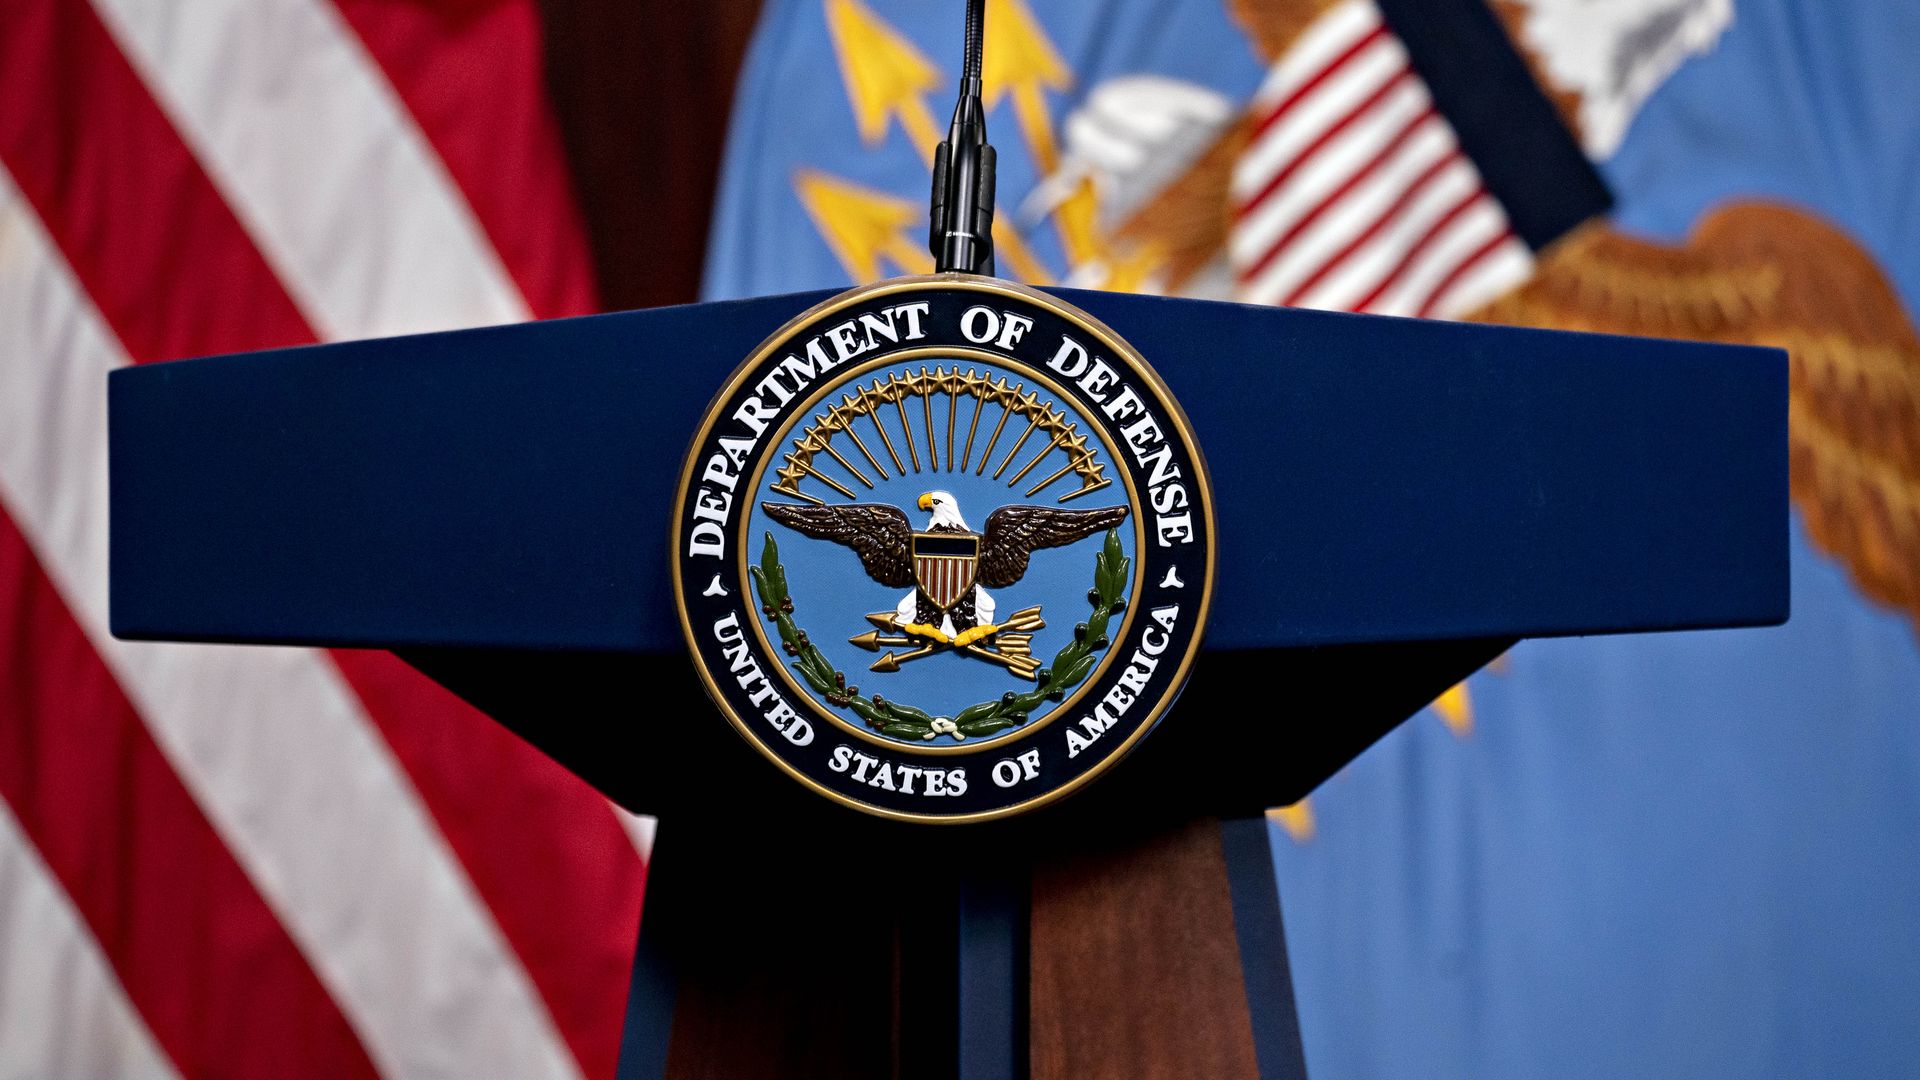 Photo of a lecturn with the Department of Defense seal